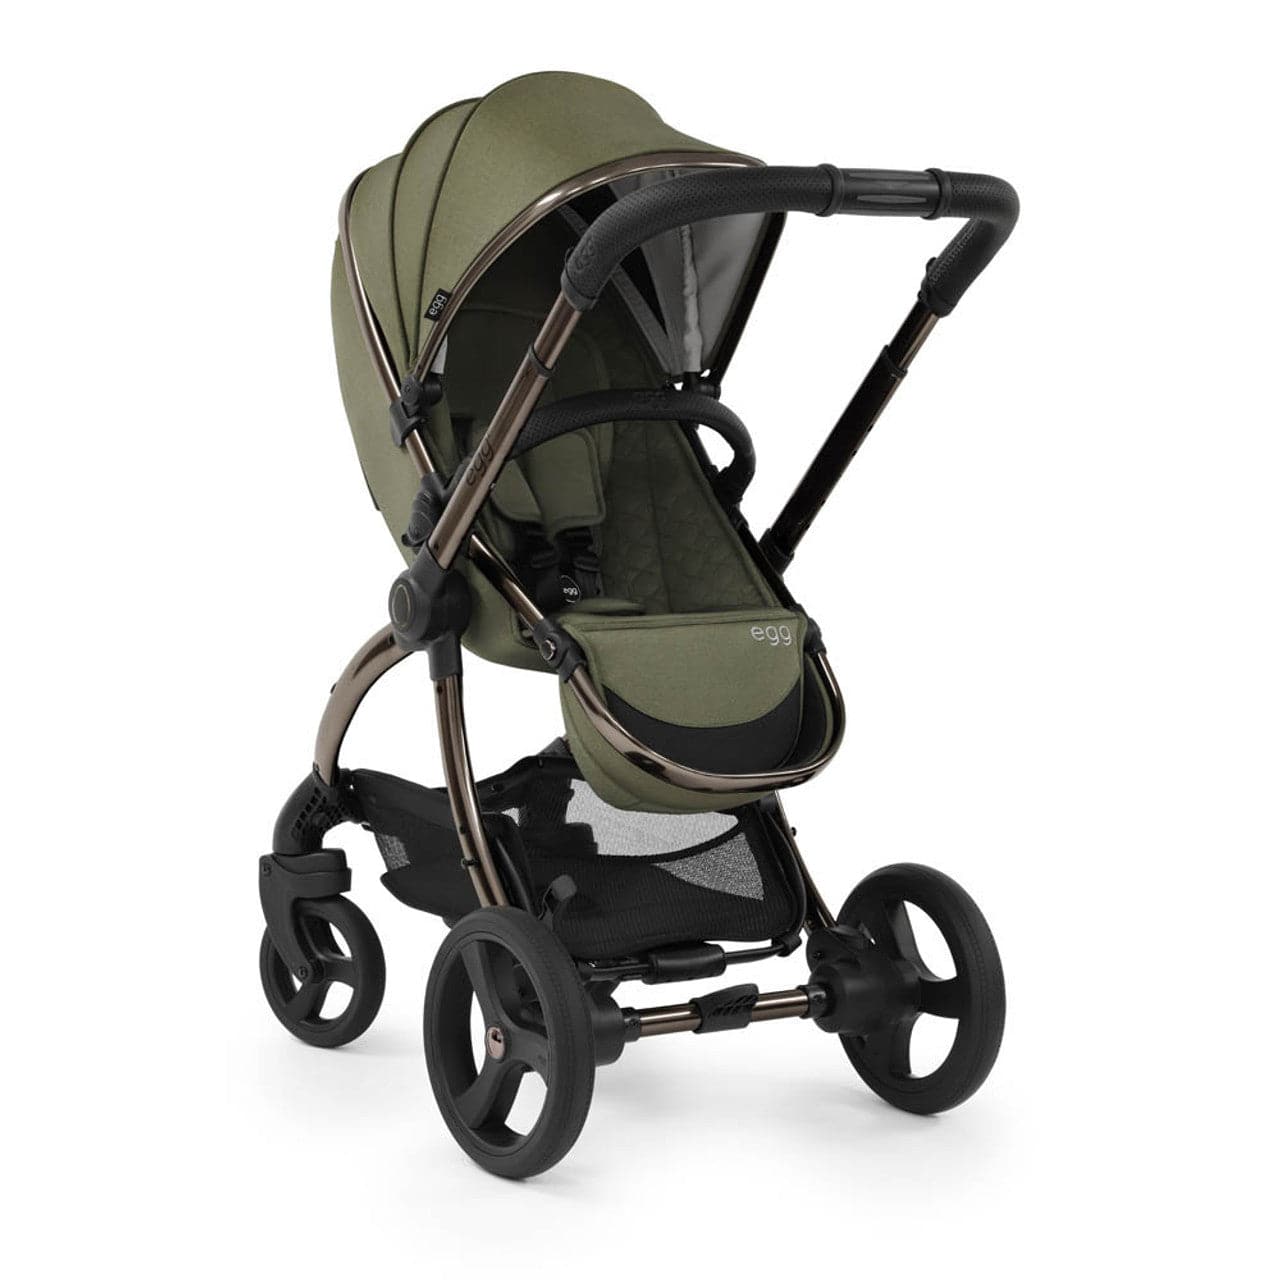 Egg® 2 Pushchair + Carrycot - Hunter Green - For Your Little One